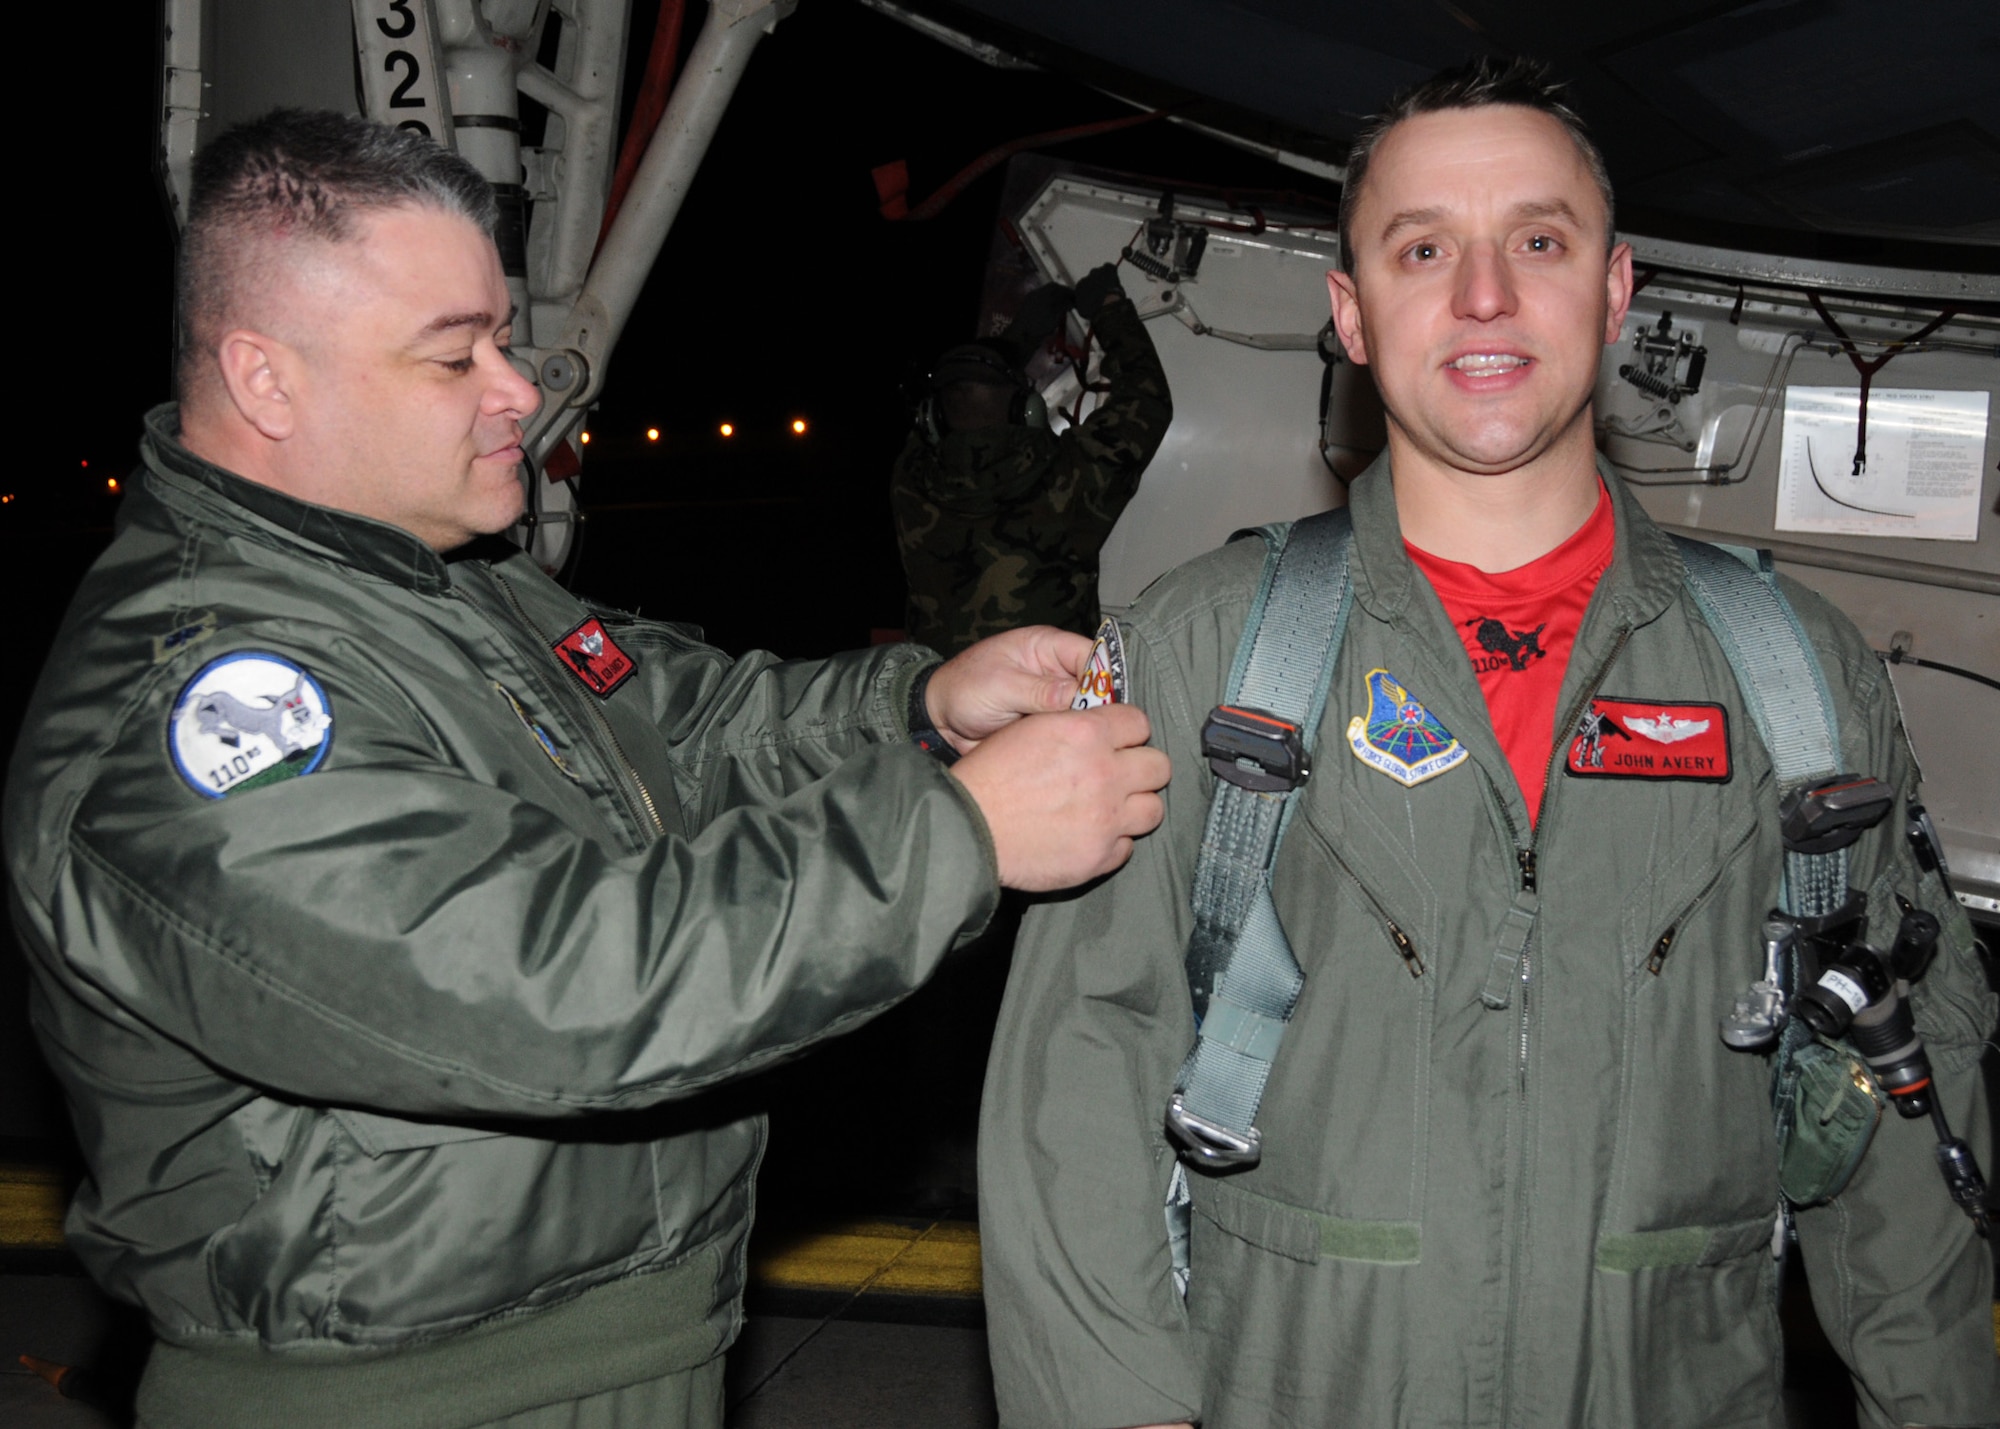 Lt. Col. Ken "Willie B" Eaves, 110th Bomb Squadron commander, awards Maj. John "Fokker" Avery, 110th BS chief weapons officer, his 1000 hours patch for attaining the 1000 flying hours milestone in the B-2 bomber, March 19, at Whiteman AFB, Missouri.  Avery joins an elite group of 131st Bomb Wing Missouri Air National Guard pilots: Lt. Col. Michael Means who achieved this milestone almost three years ago while on active duty; Lt. Col. Rhett Binger, Jun 2009; and Maj. Jared Kennish, Oct.2009; (Air Force Photo by Master Sgt. Mary-Dale Amison.  RELEASED)